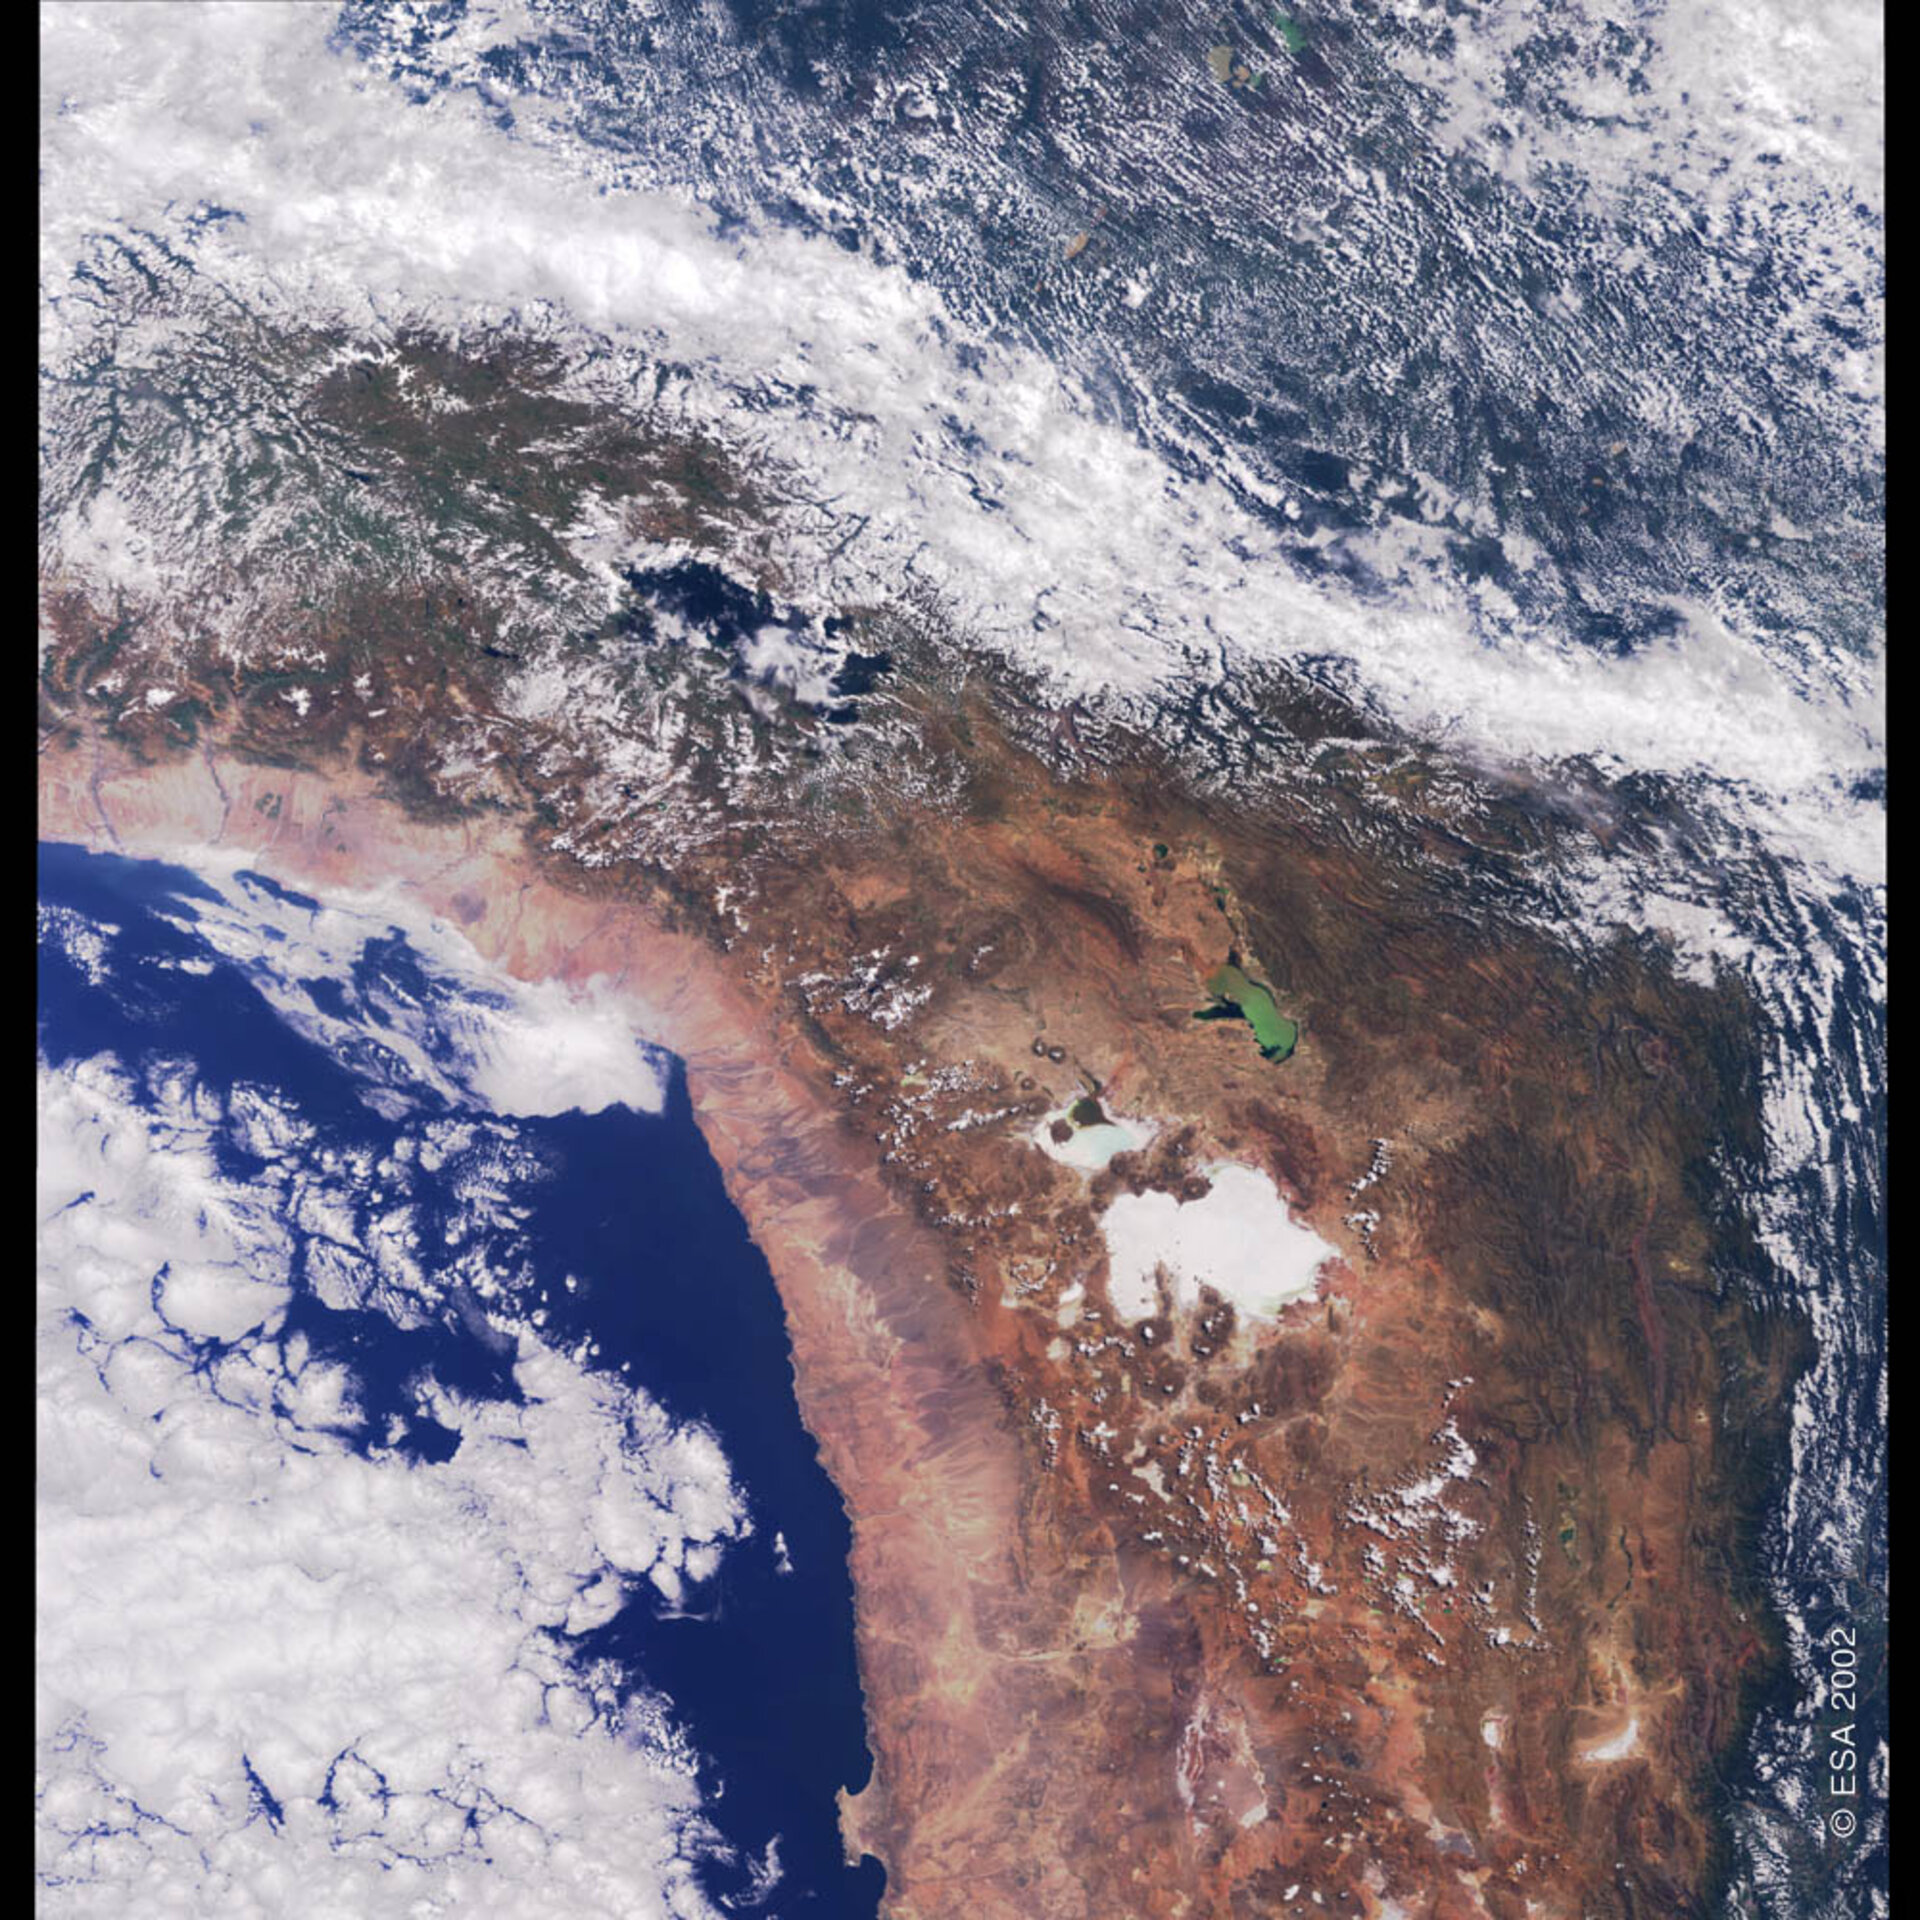 An image of Chile and Bolivia, captured by Envisat's MERIS sensor in April 2002